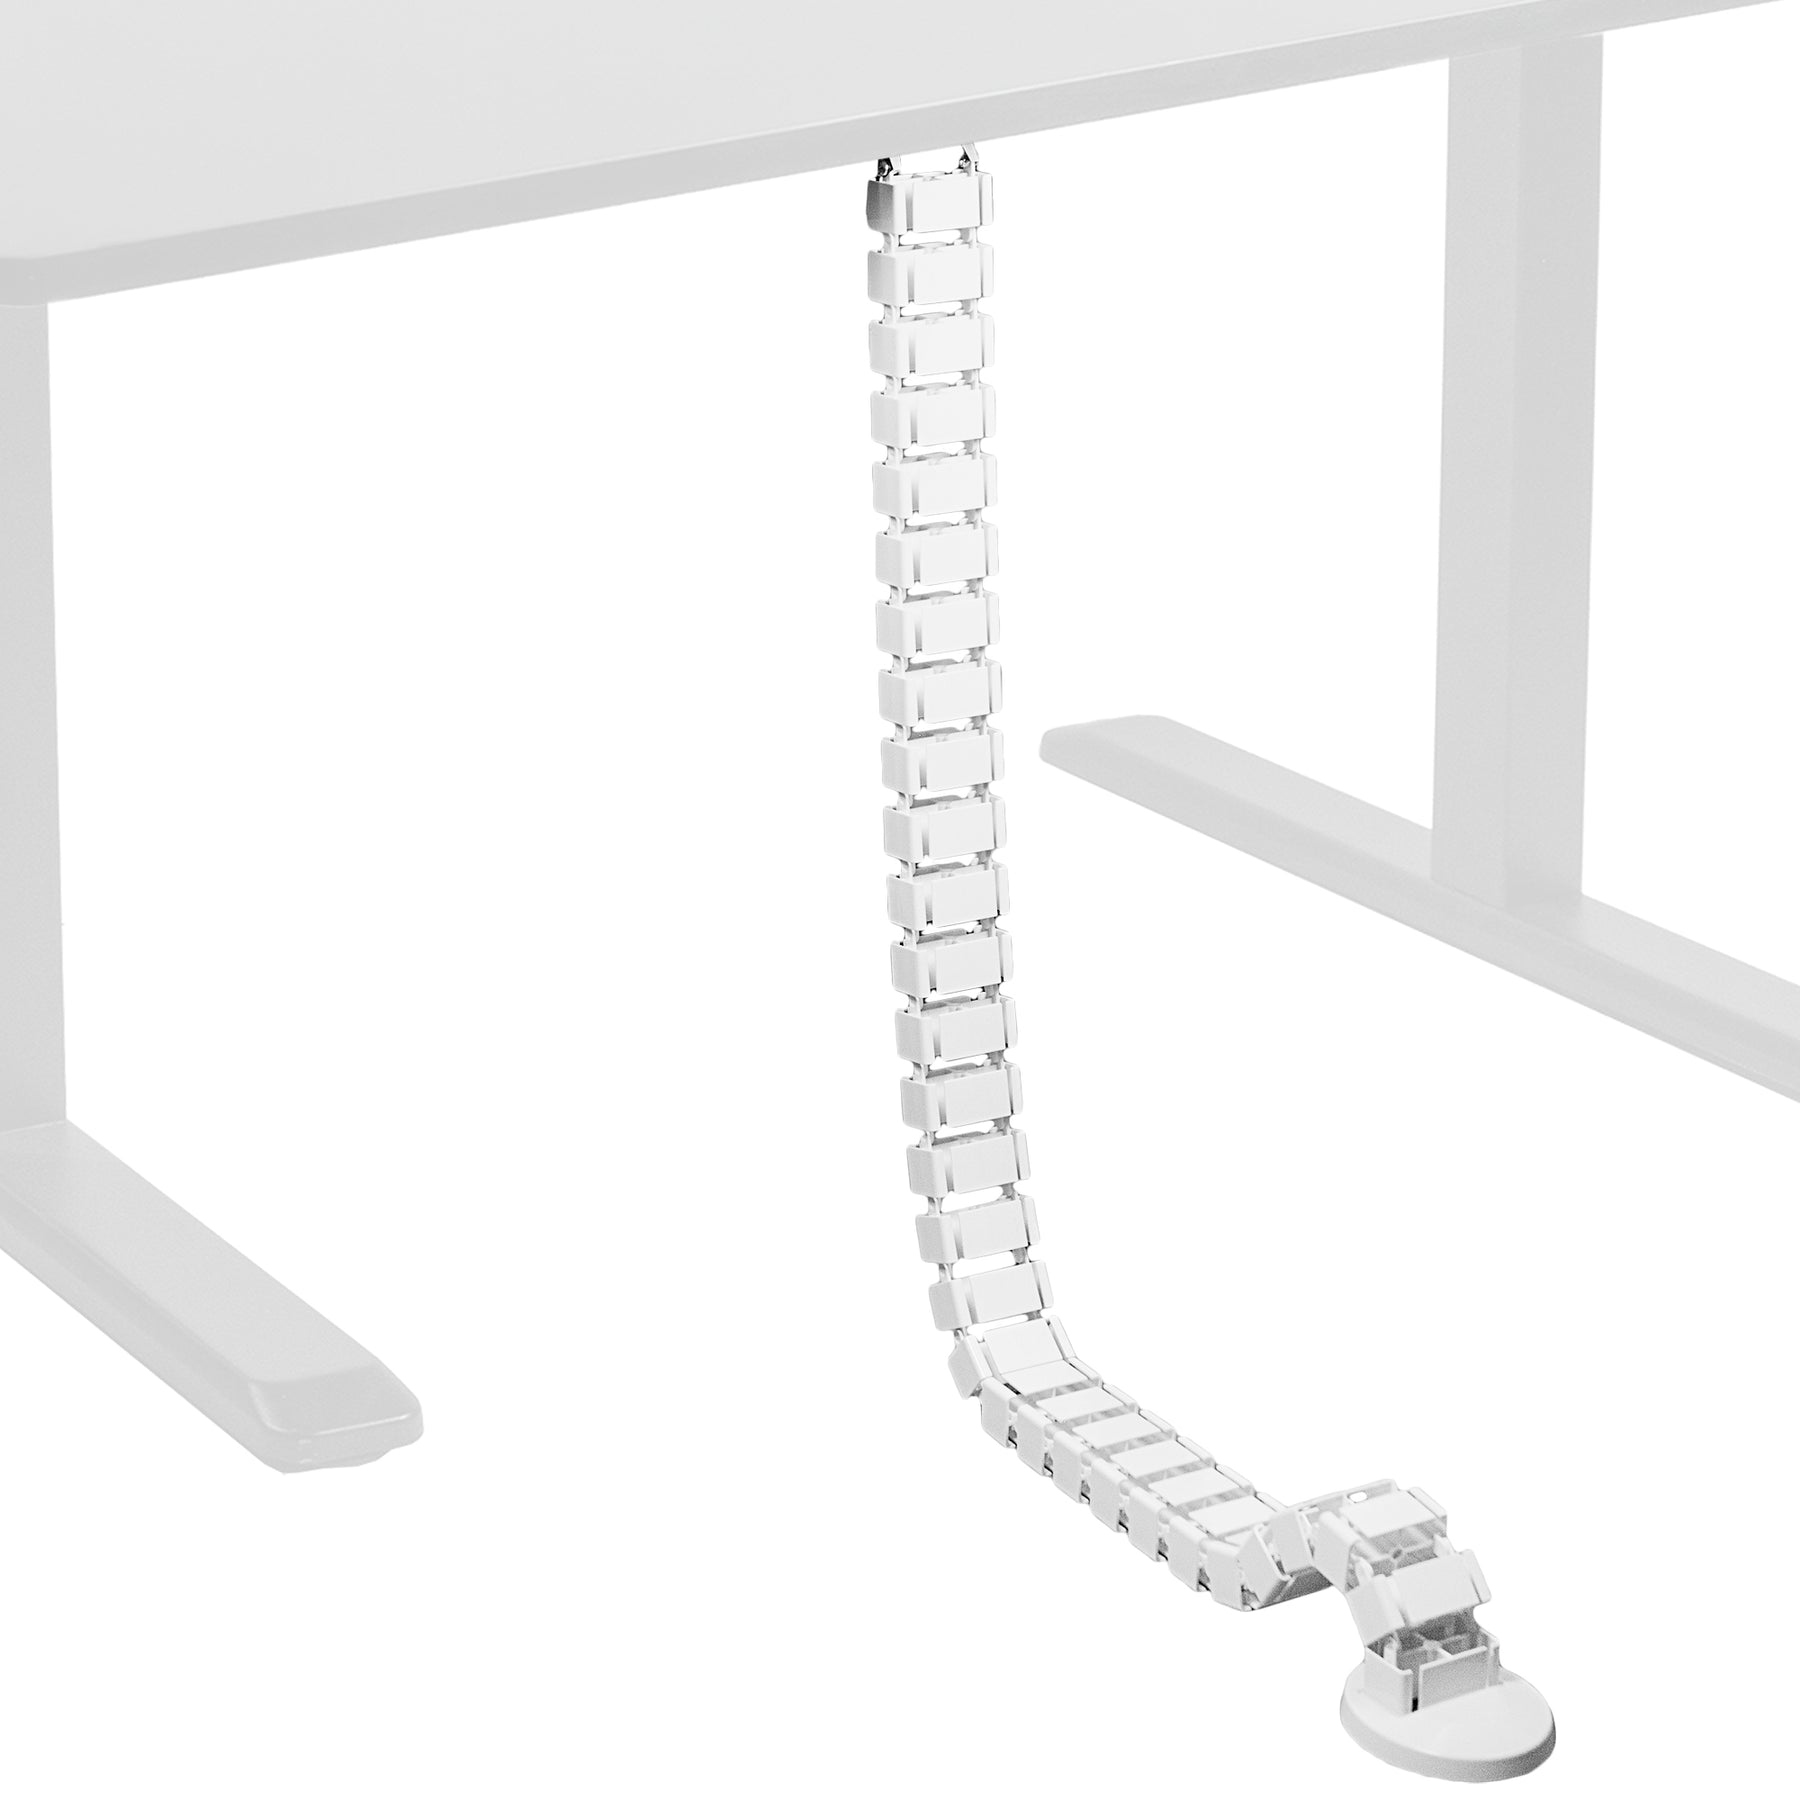 Mount-It! Cable Management Spine | Desk Cord Organizer Vertebrae | 50 inch Long, Size: 19.8 x 4.6 x 3.2 Inches